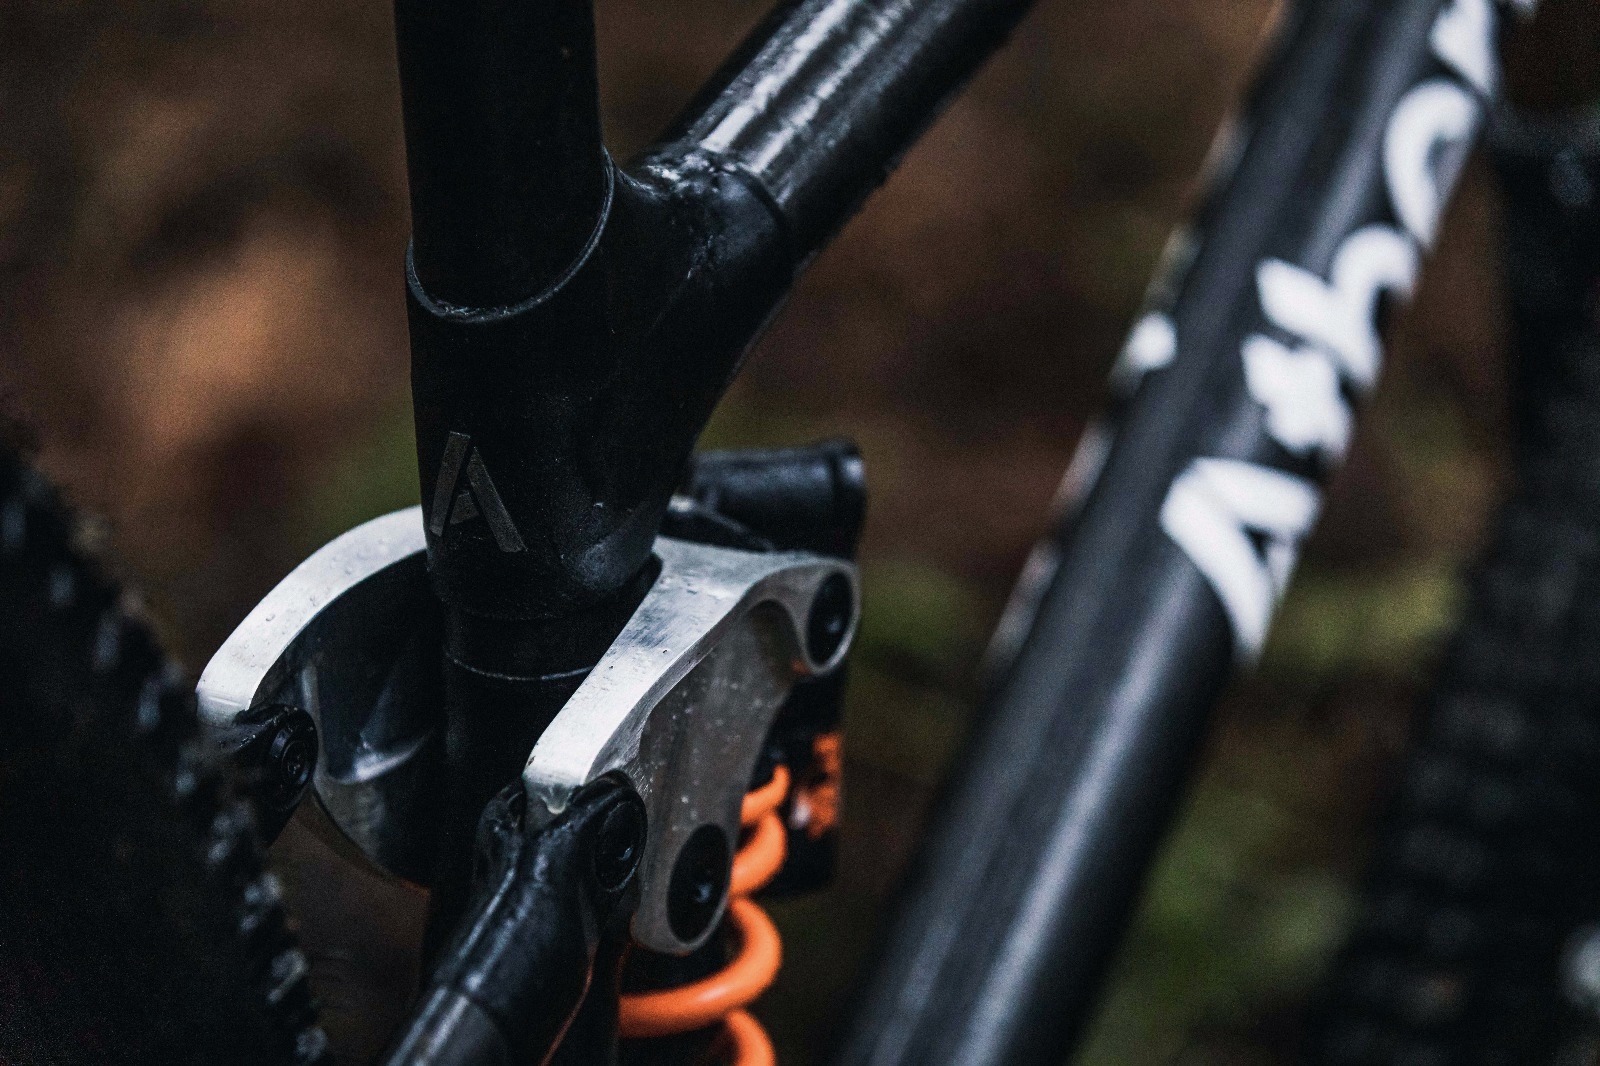 The Athertons provide a closer look at their prototype DH bike w/ 3D printed lugs